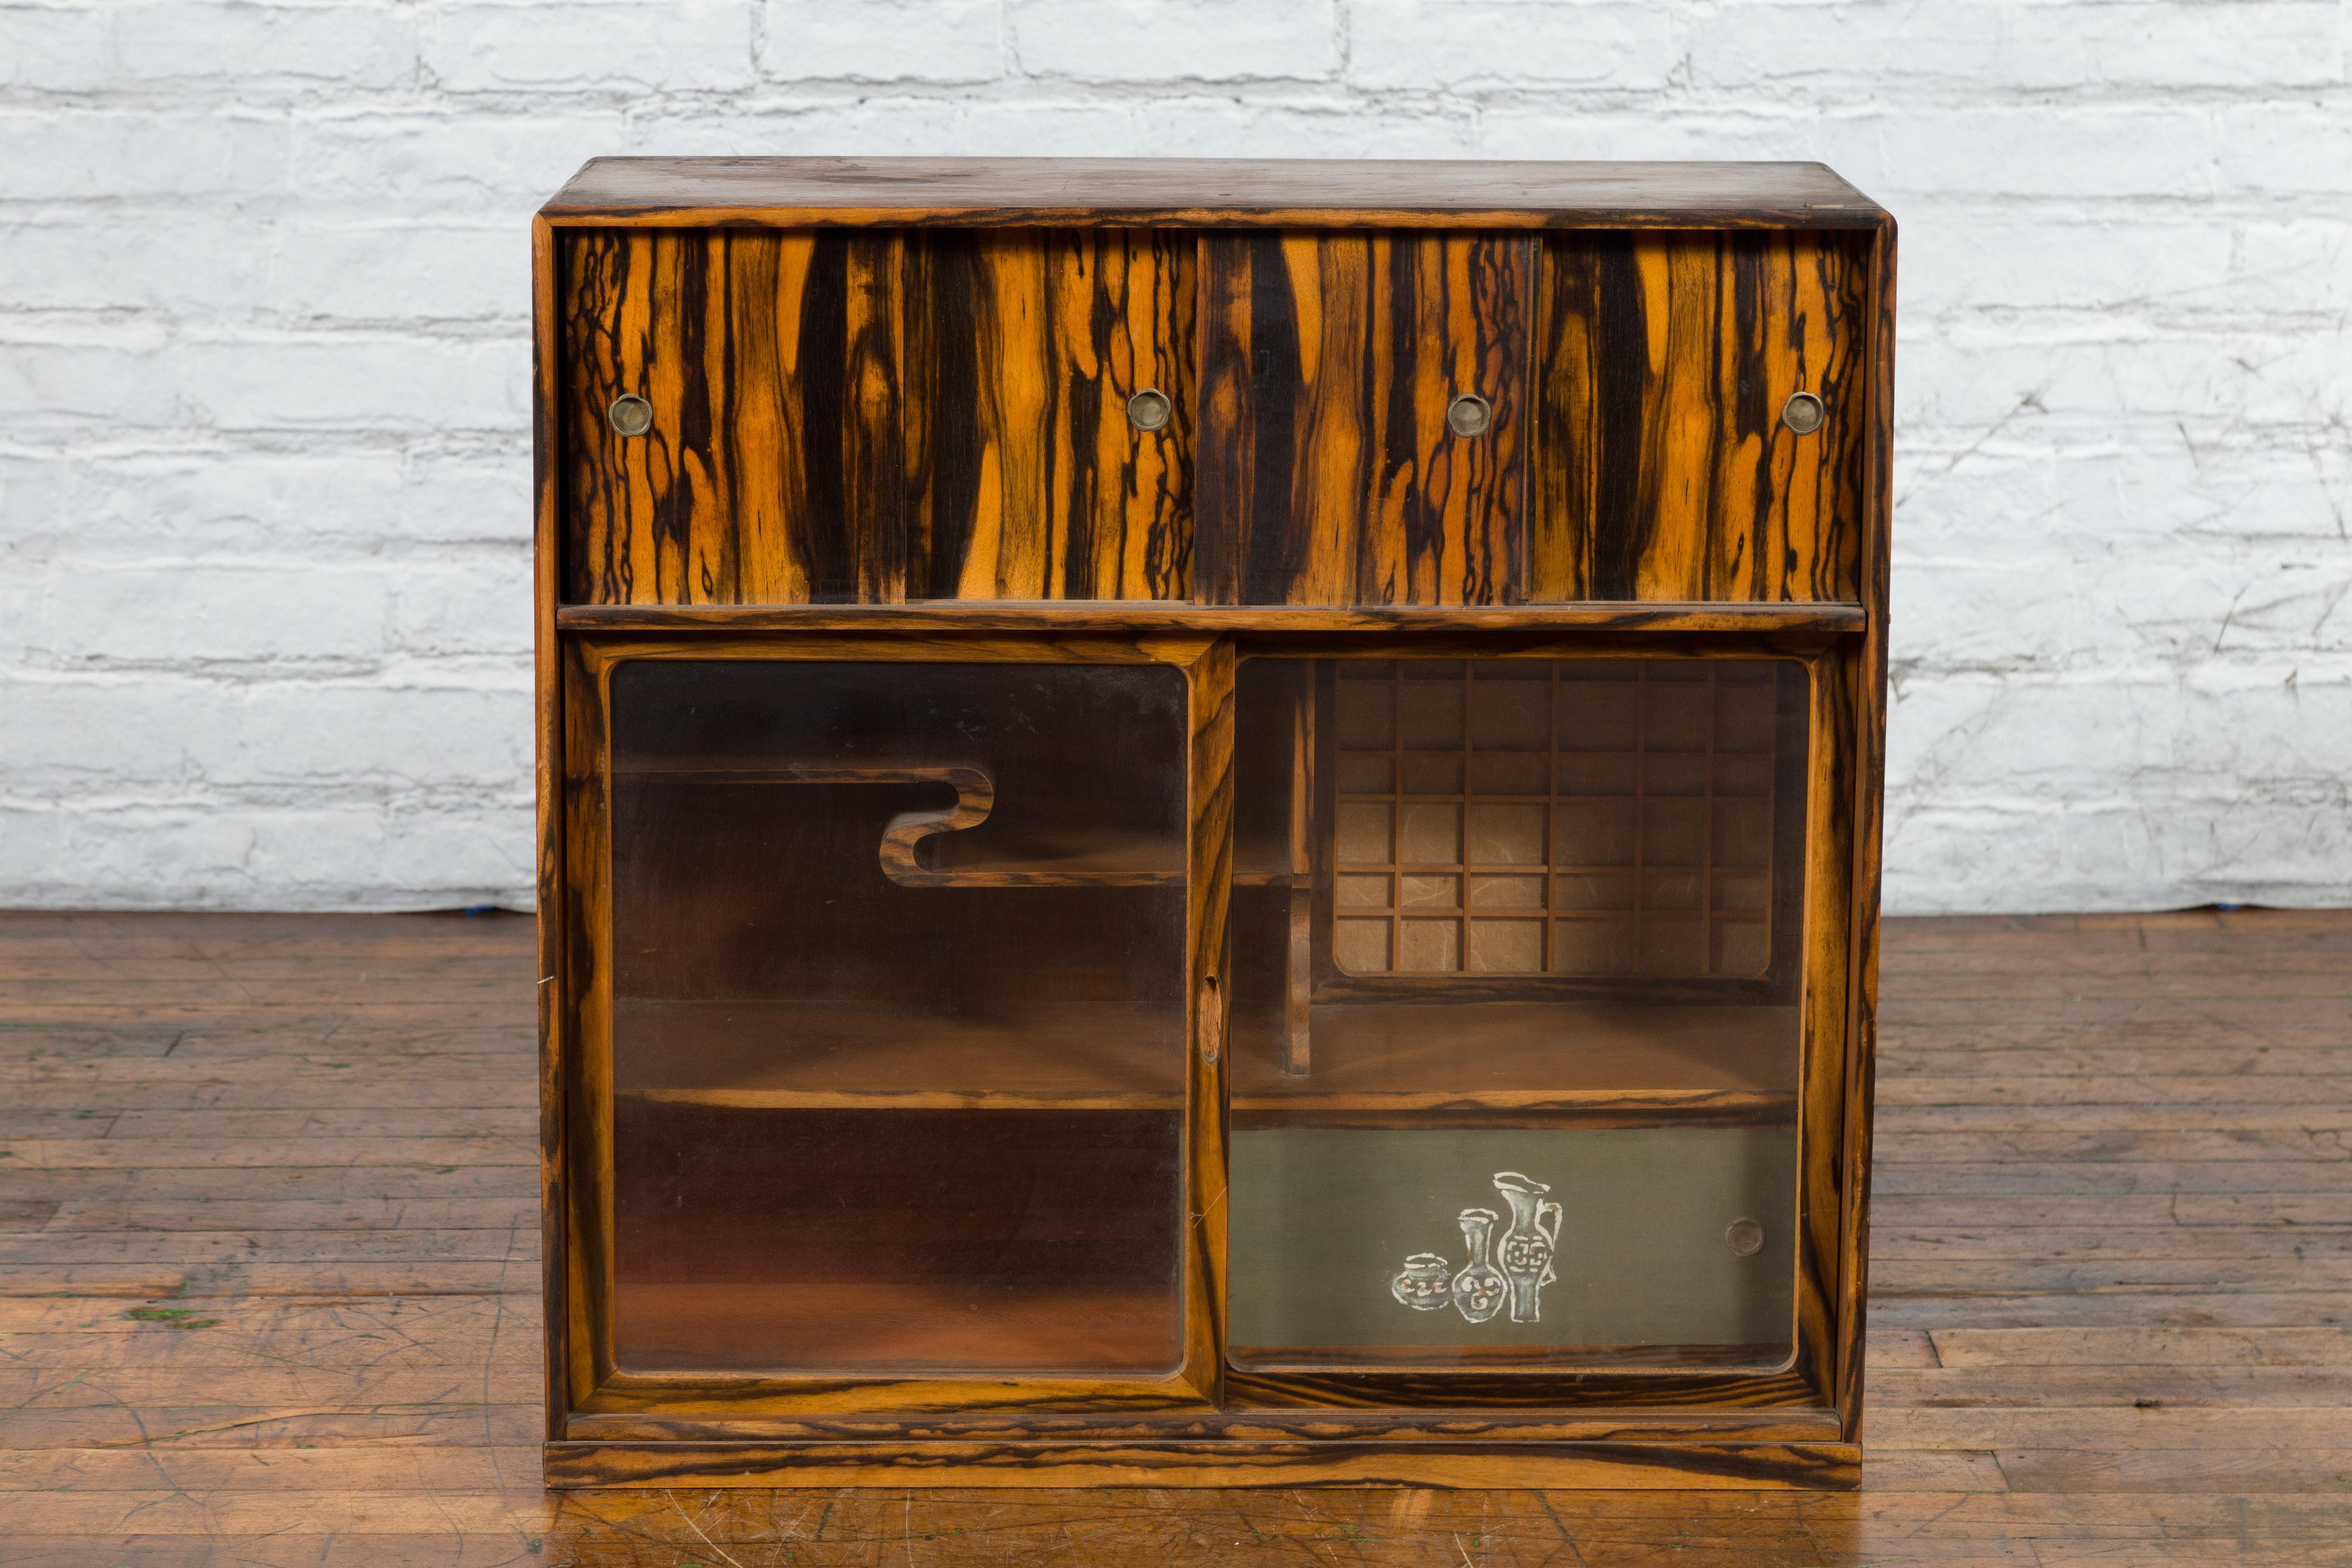 A Japanese zebra wood tansu chest from the 19th century, with sliding doors, glass panels and secret storage. Created in Japan during the 19th century, this tansu chest features a linear silhouette perfectly complimented by its zebra wood grain. A